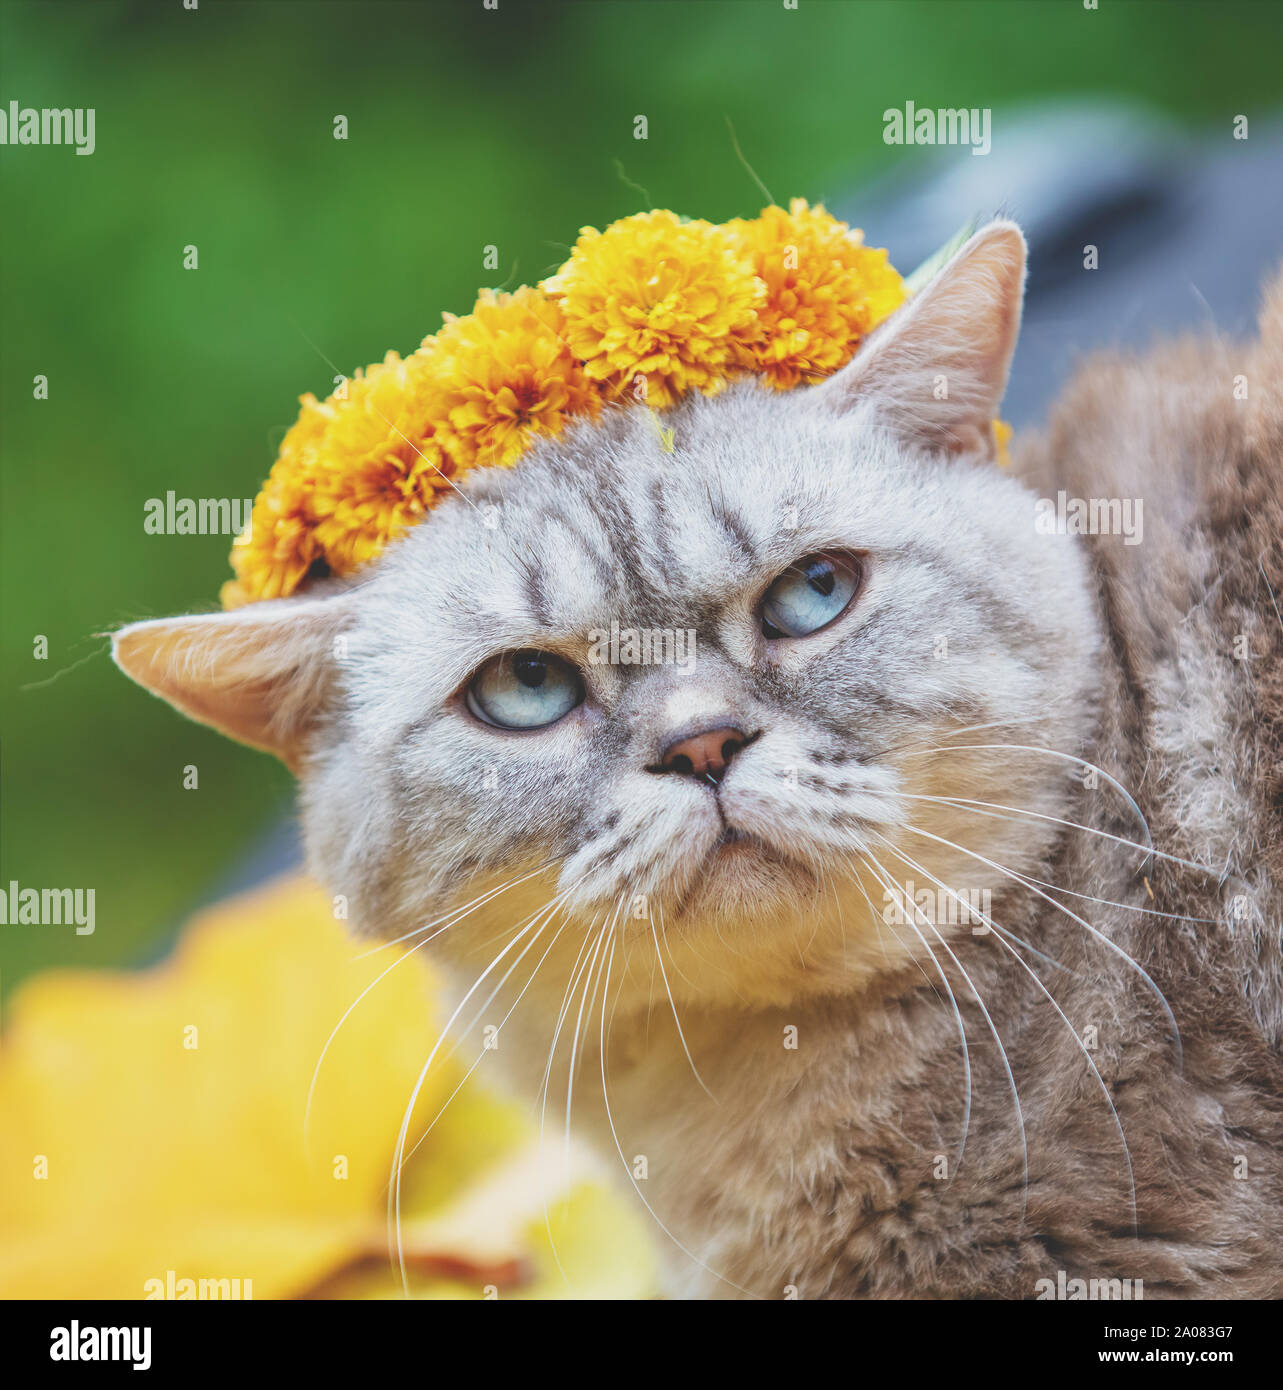 Portrait of a cat outdoors in autumn. Cat crowned flower chaplet and lying on yellow fallen leaves Stock Photo